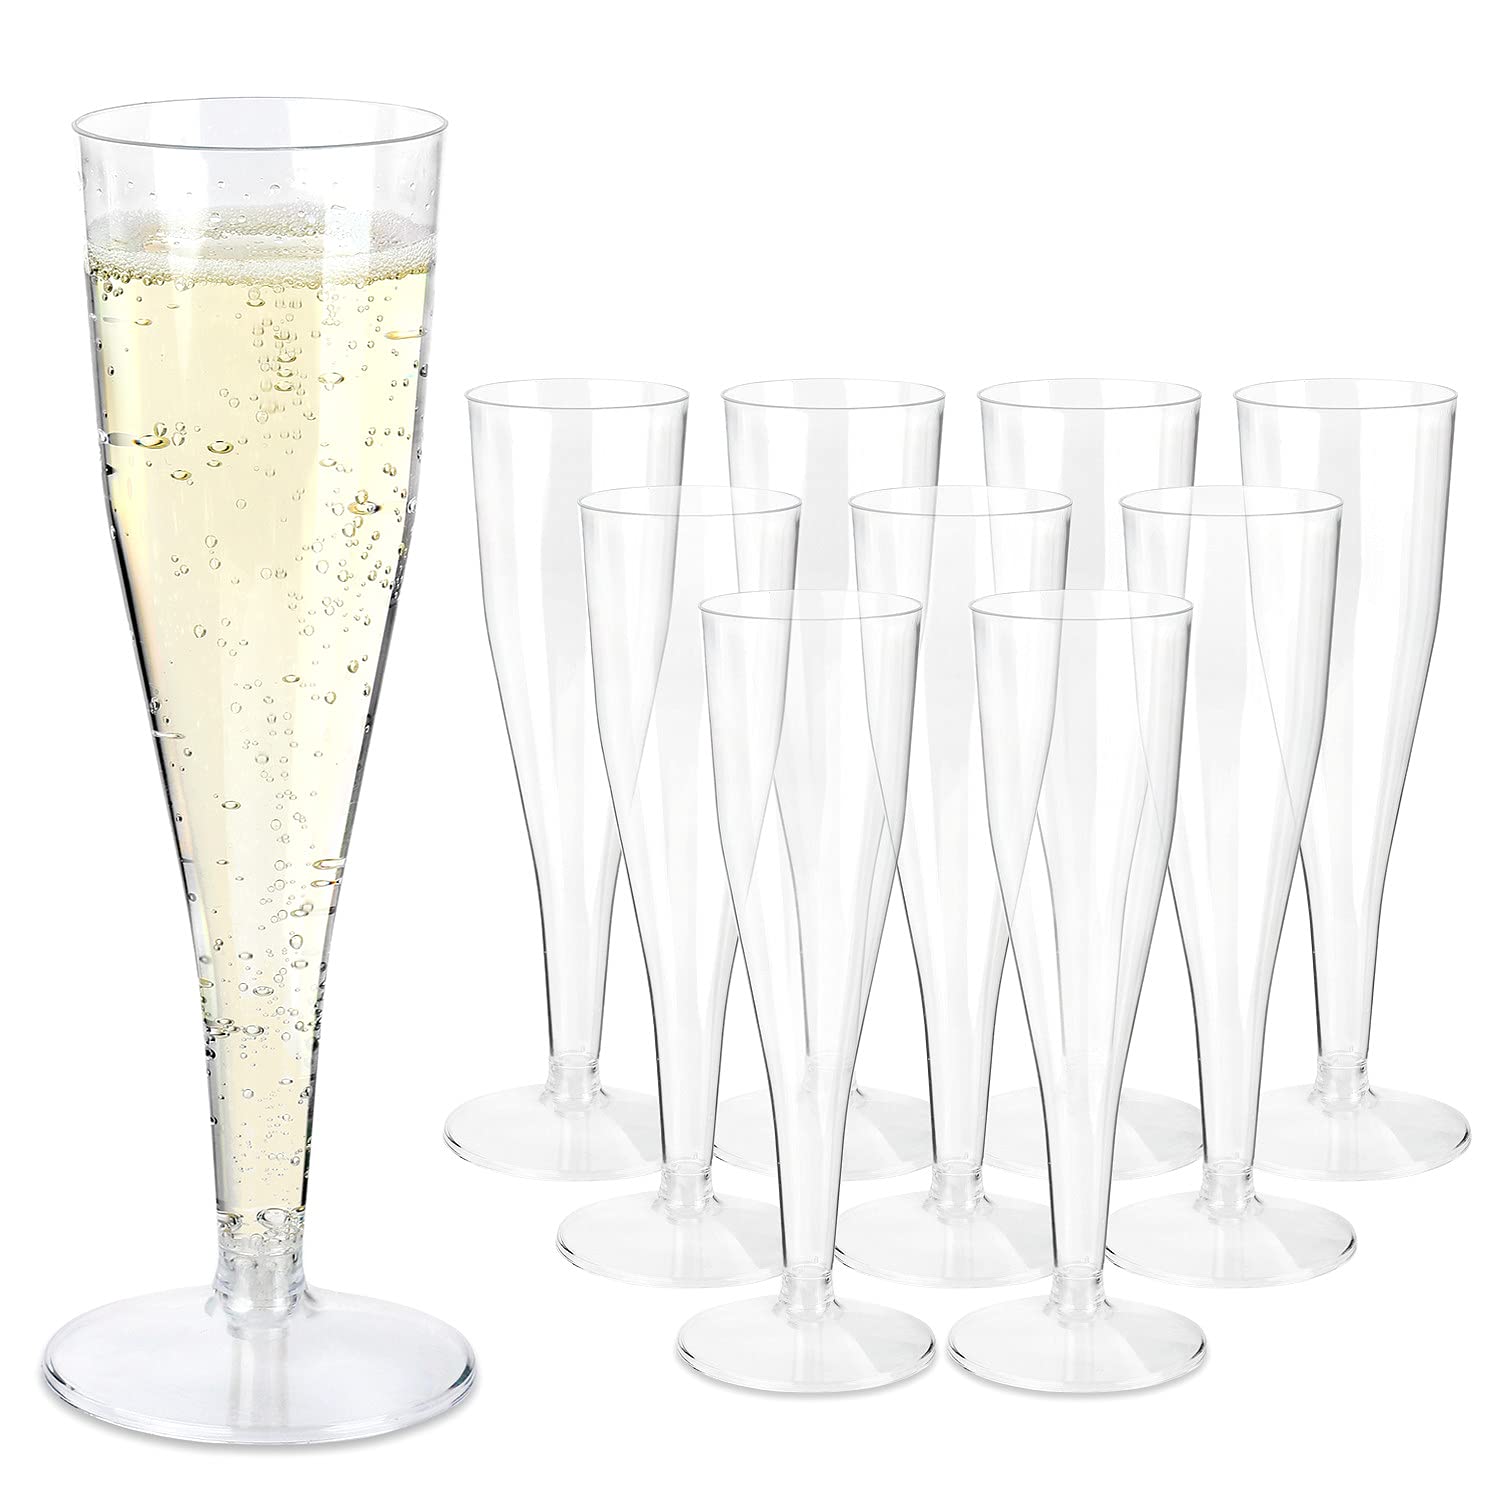 6oz/170ml Champagne Flutes Recyclable - Rigid Crystal Glasses - 10x Per Pack